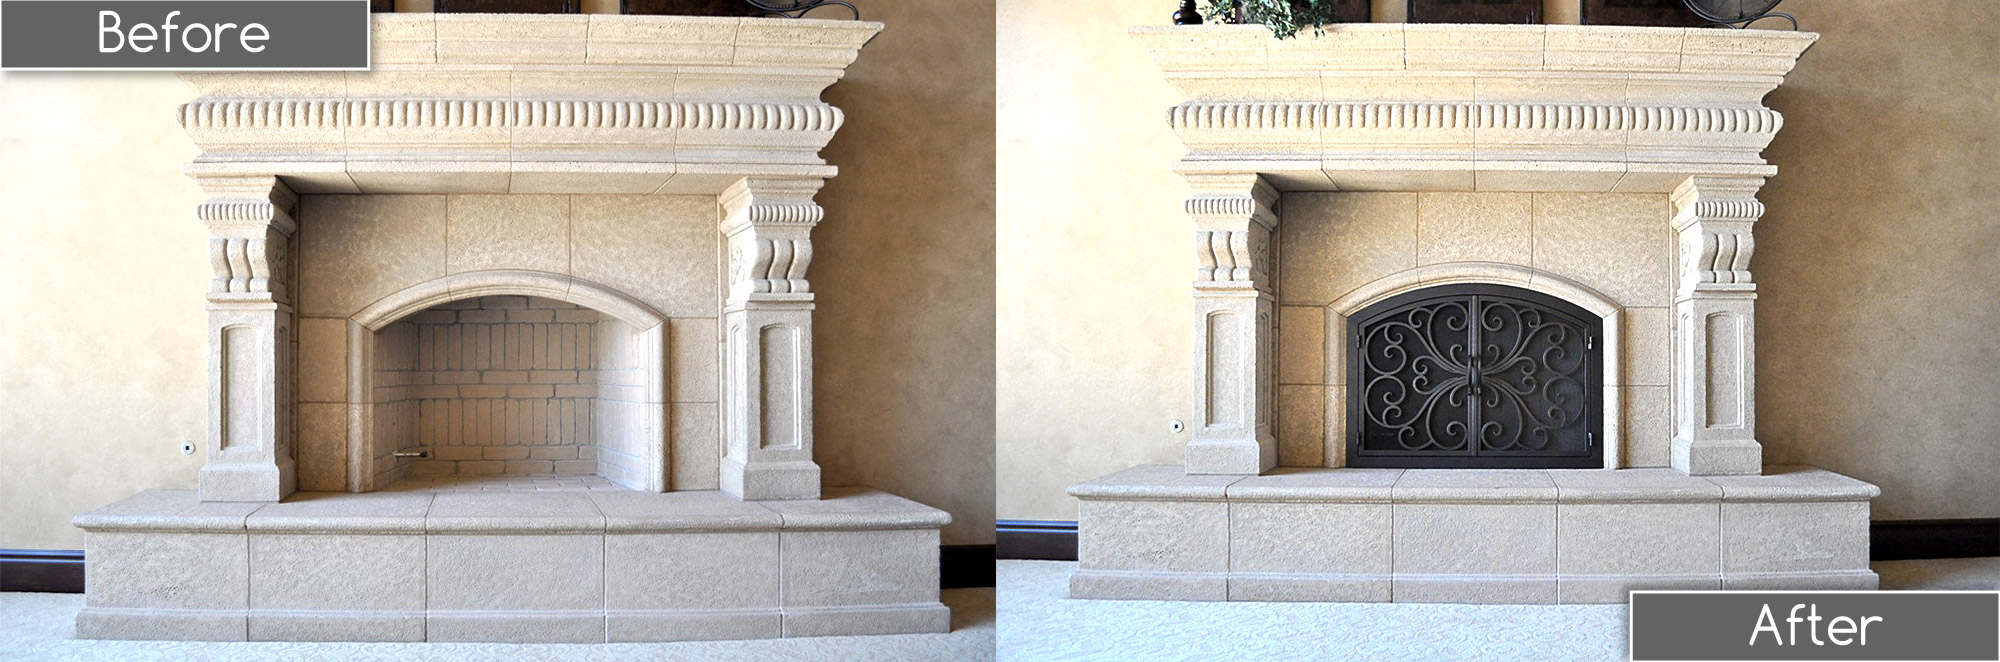 Classic Arch Fireplace Door Before and After